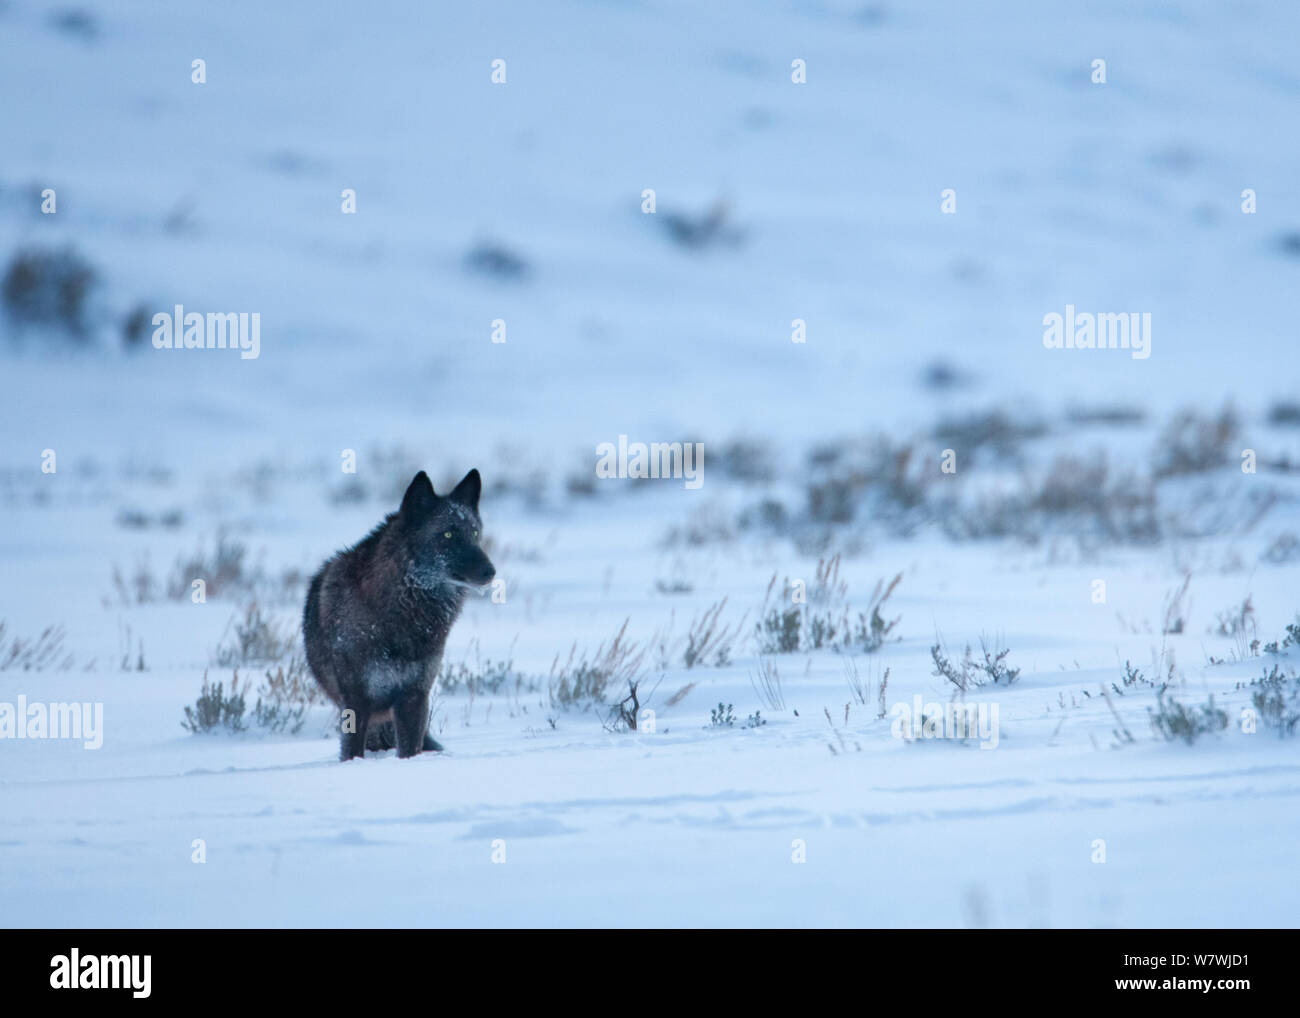 A wild Grey Wolf (Canis lupus), dark form, standing in the snow, Lamar Valley, Yellowstone National Park, Wyoming, USA. January. Stock Photo